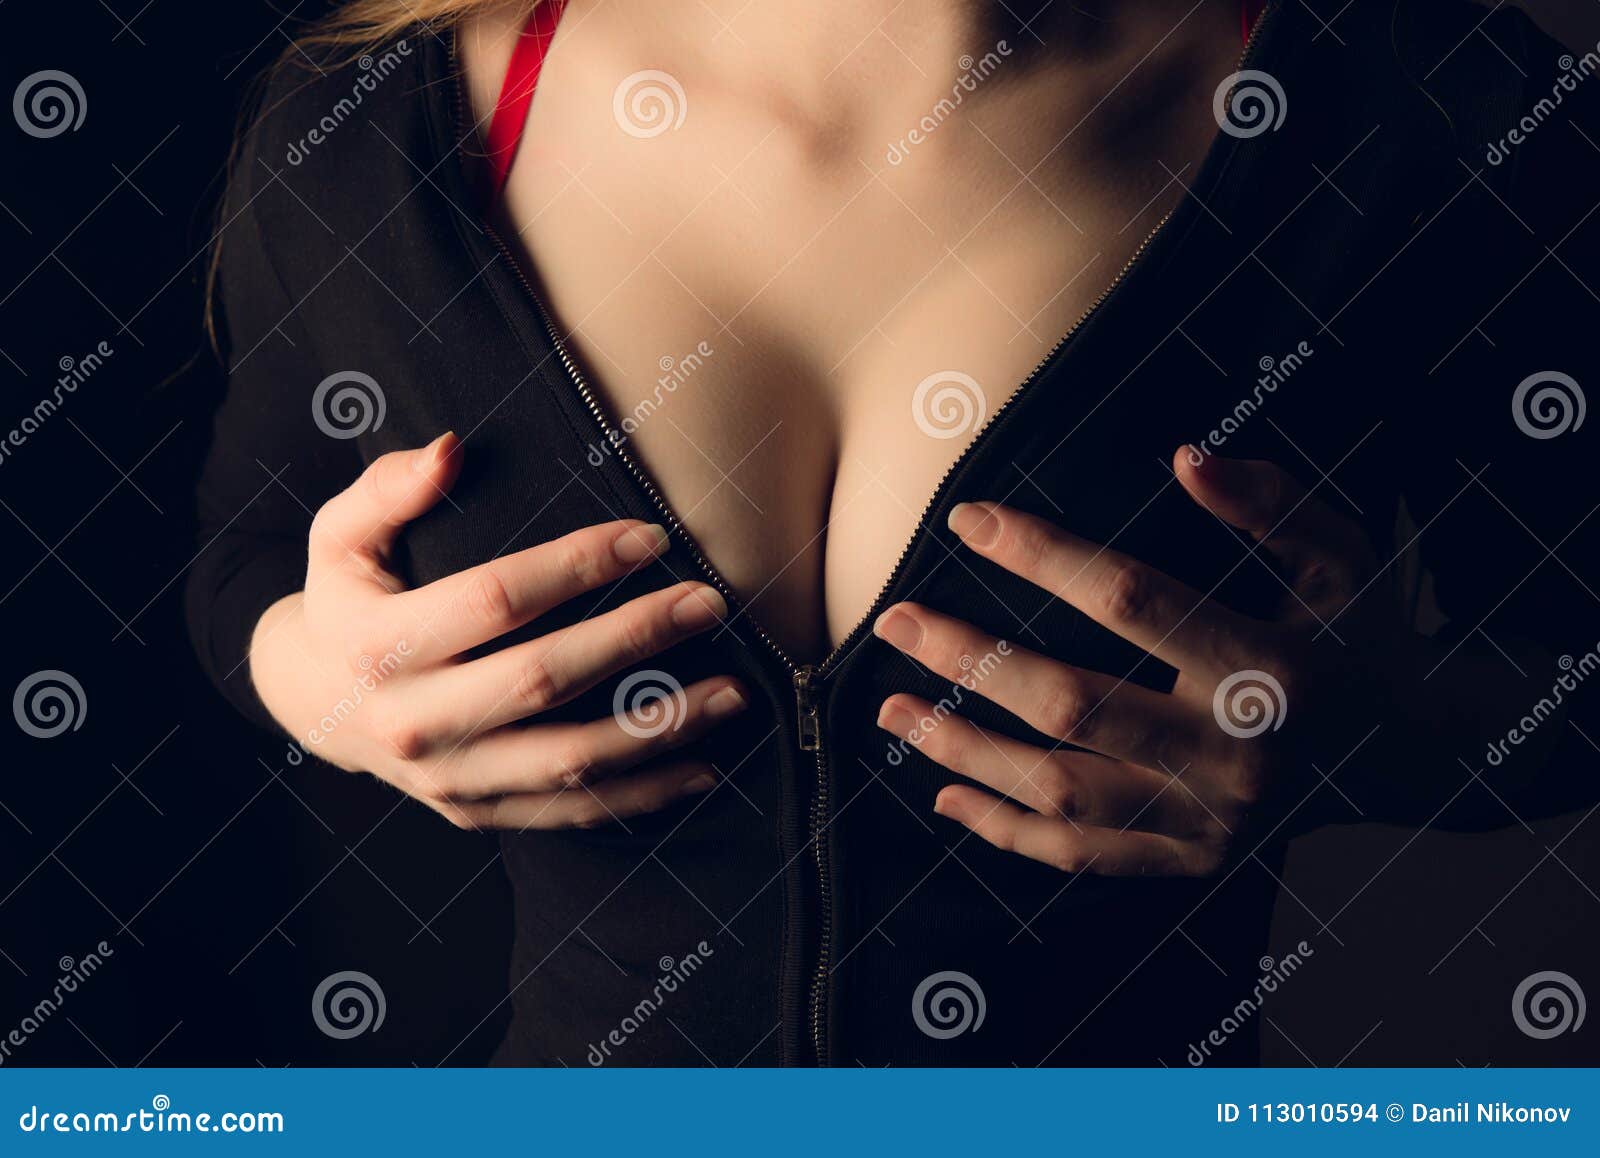 Woman Tits in Black Jacket. Stock Photo - Image of babe, black: 113010594